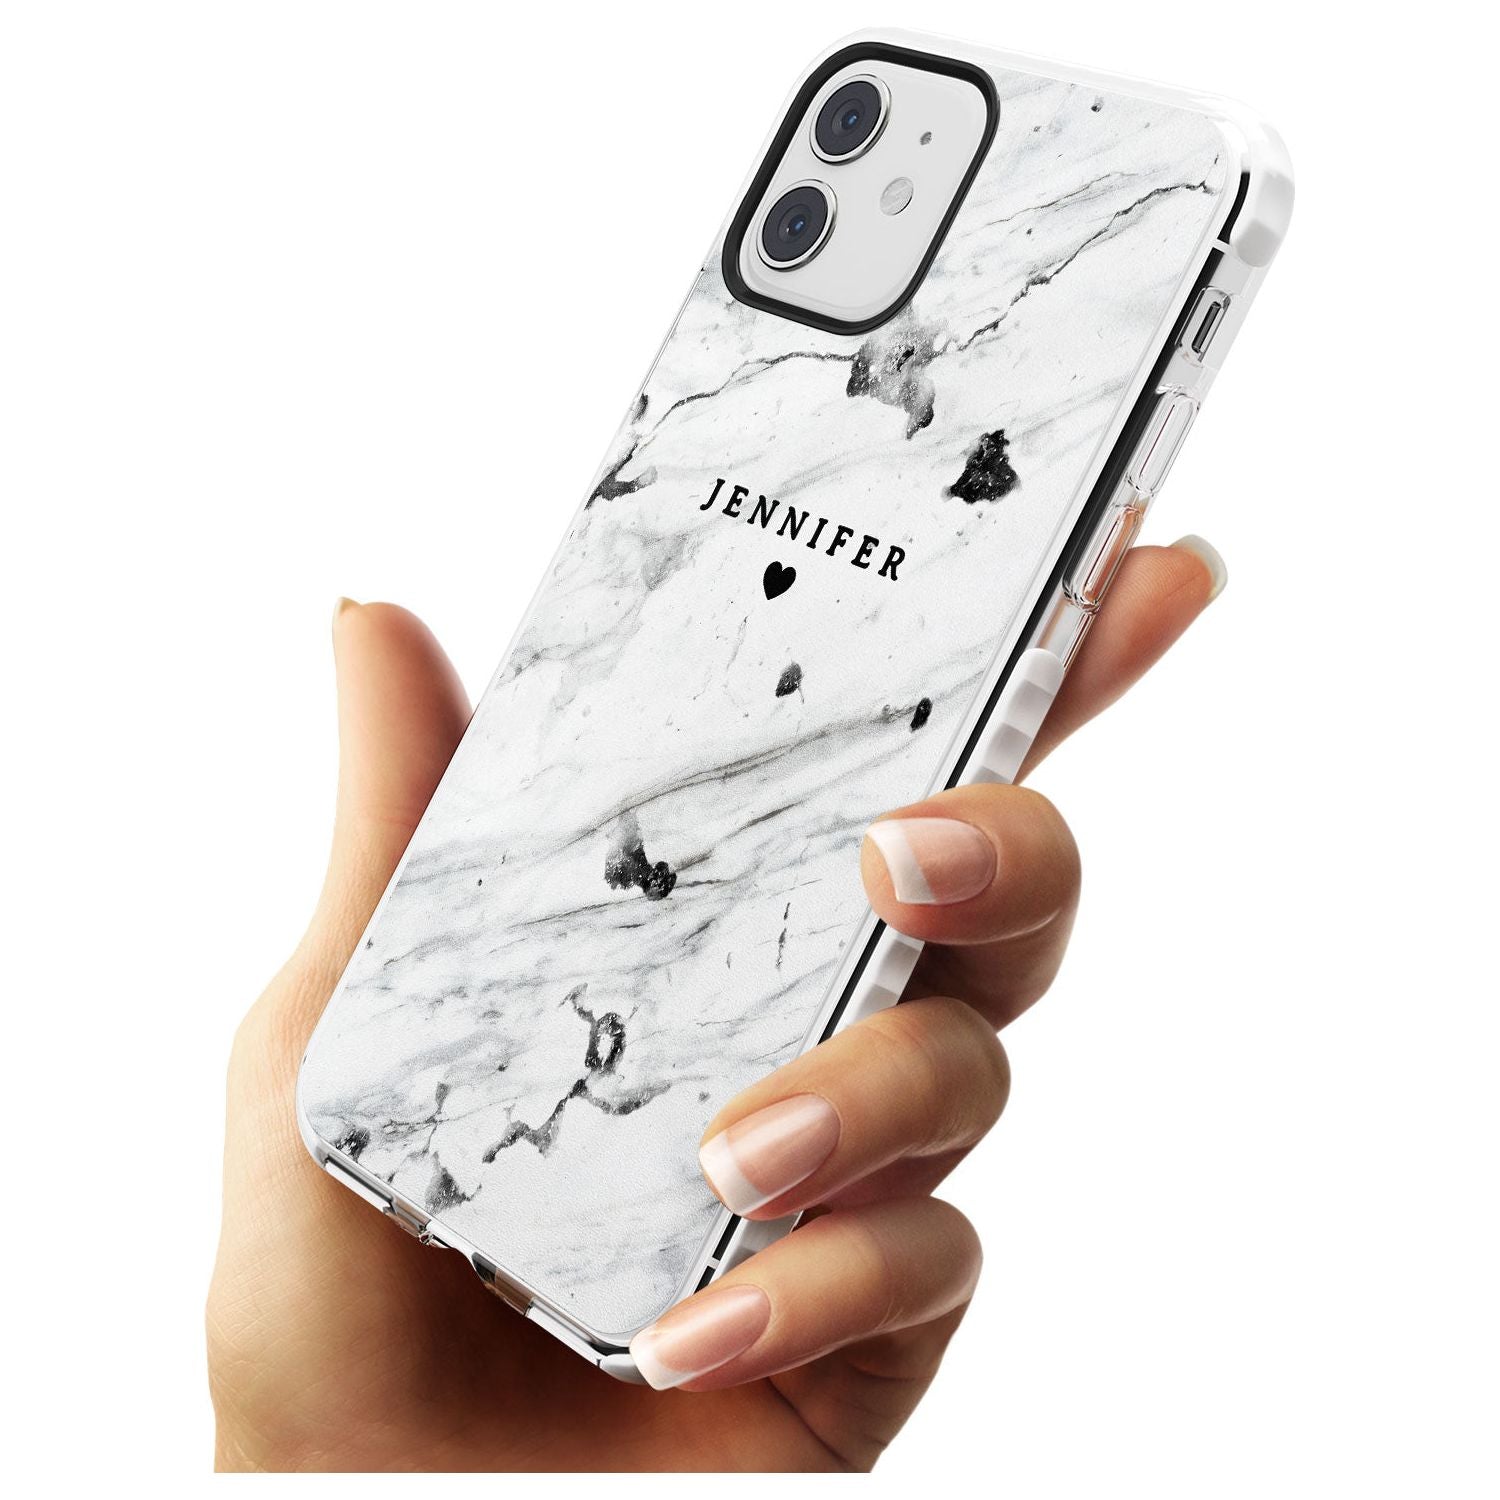 Personalised Black & White Marble Slim TPU Phone Case for iPhone 11